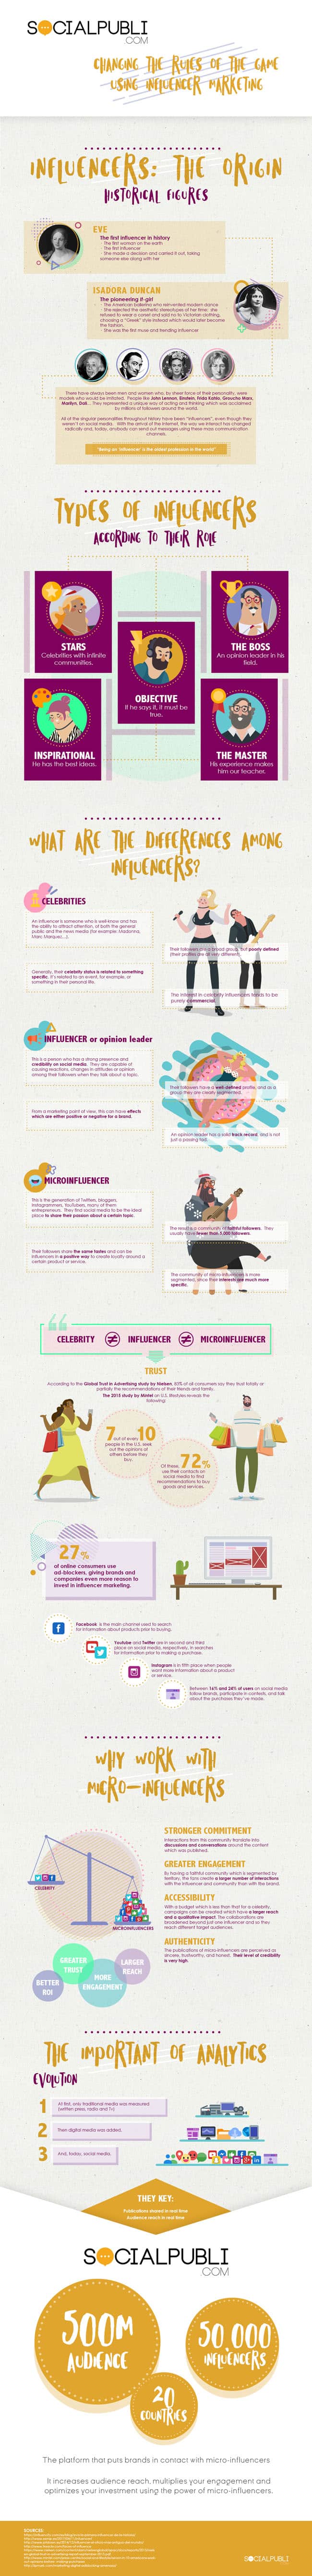 Micro-influencers Infographic